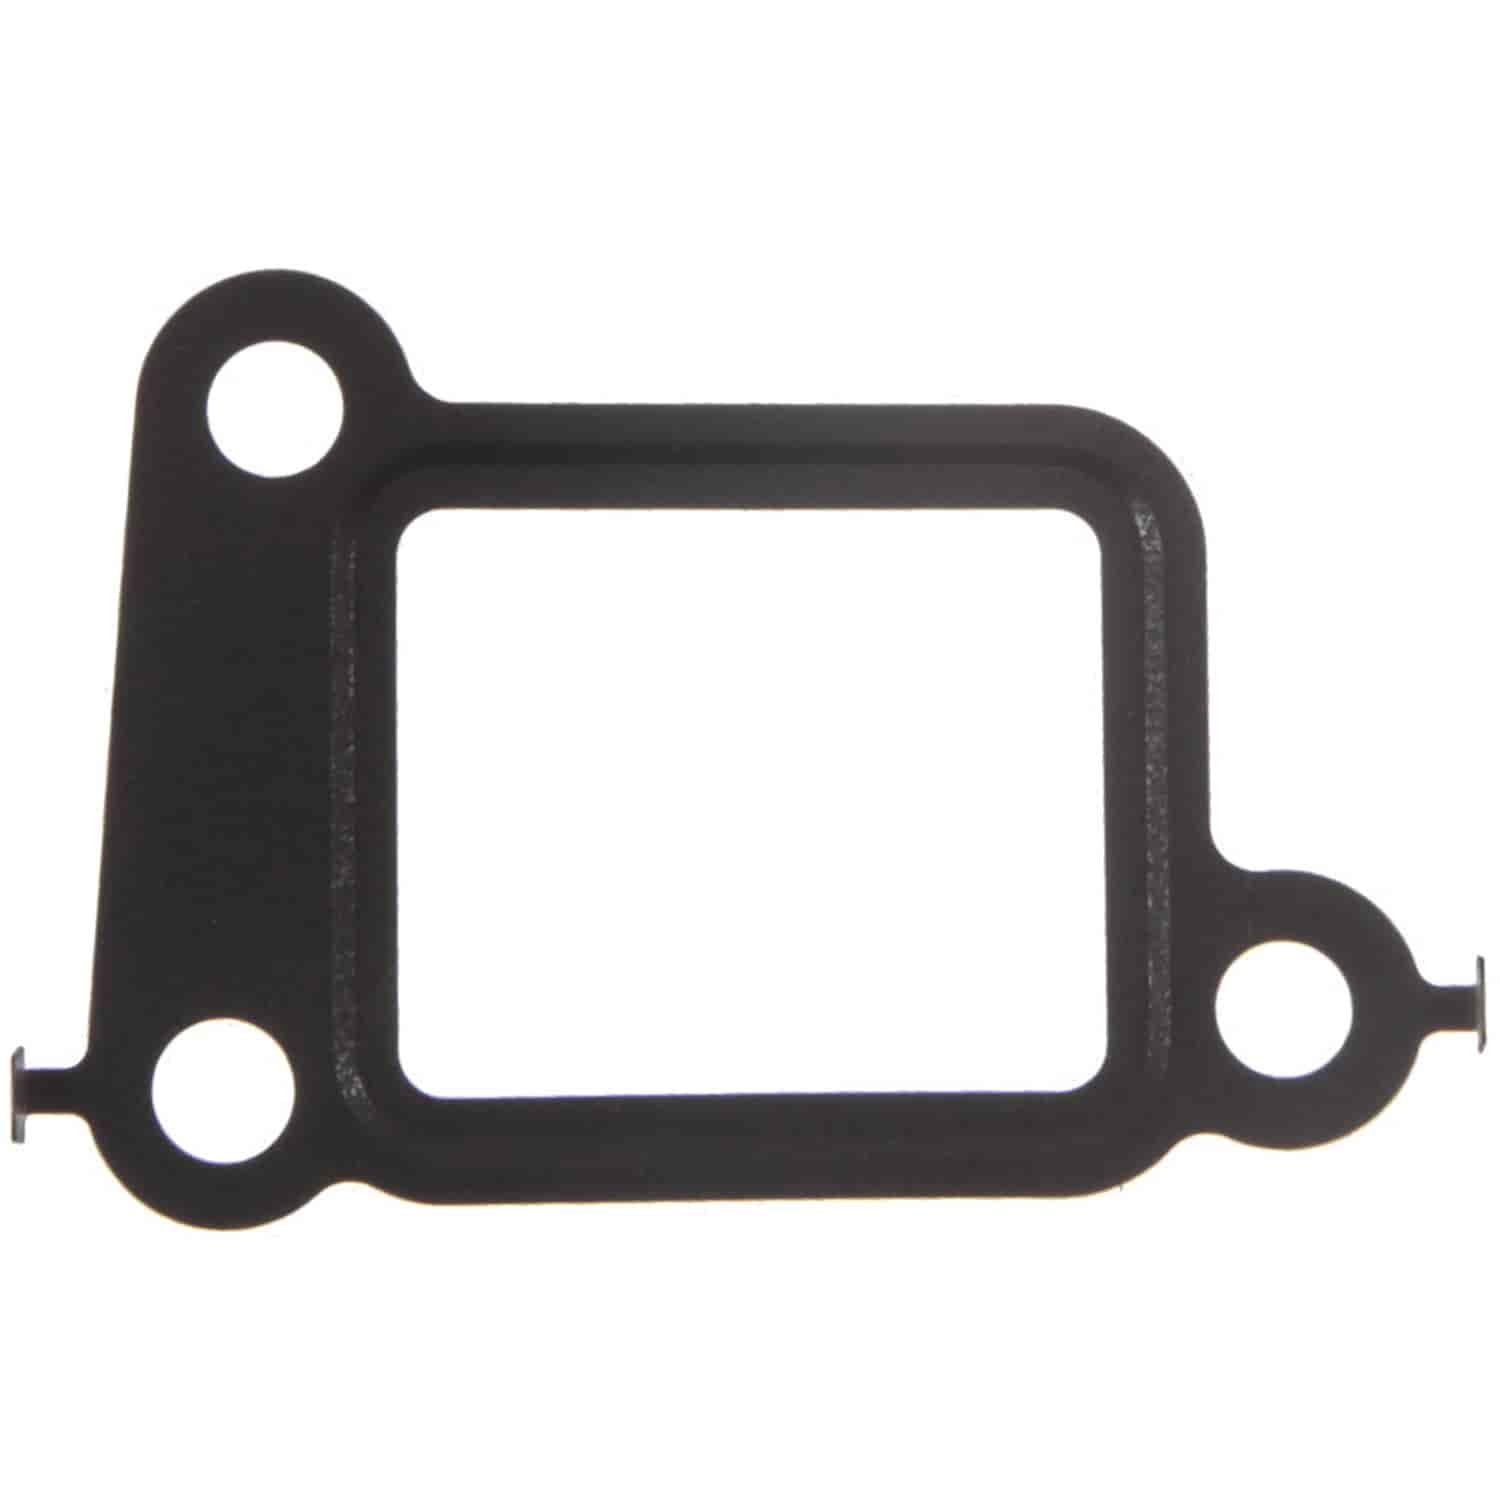 Water Outlet Gasket NISSAN / INFINITI 5552cc 5.6L